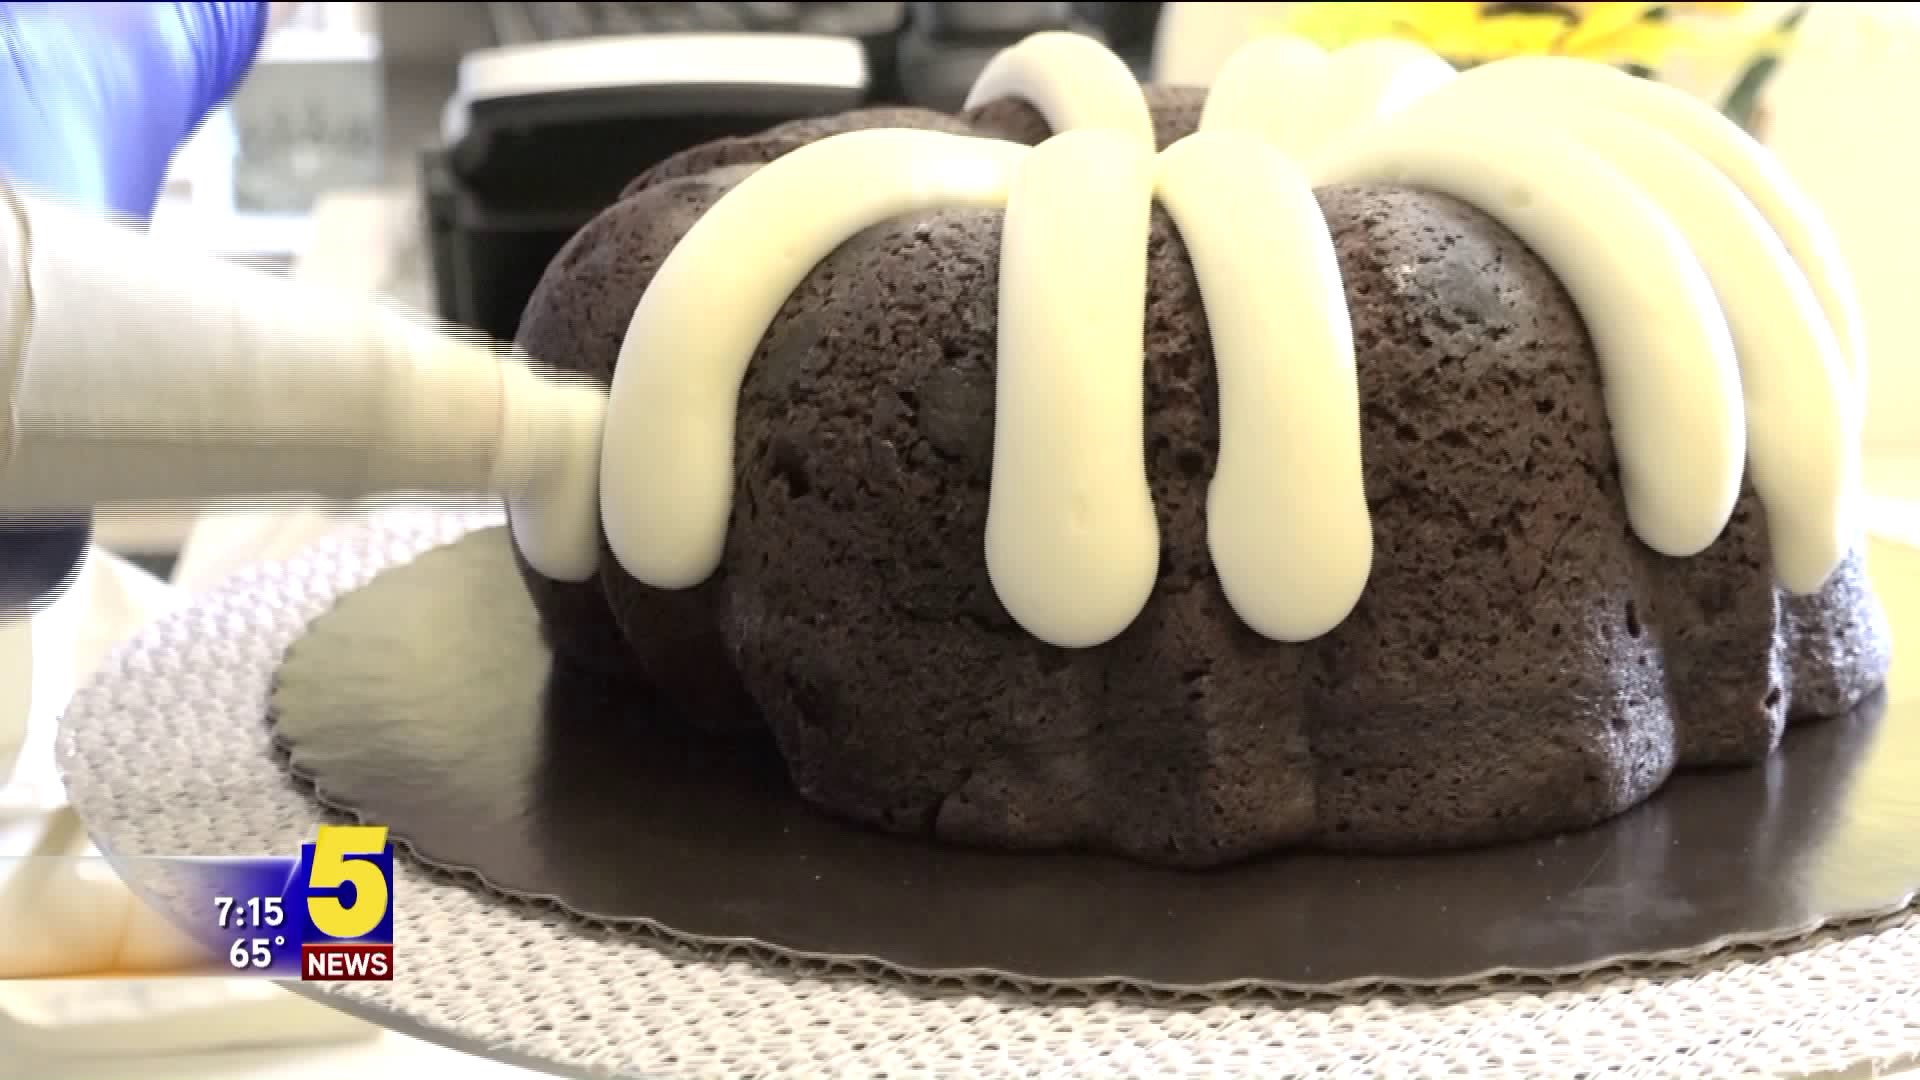 Chocolate Cabbage Bundt Cake with whipped cream cheese frosting Recipe